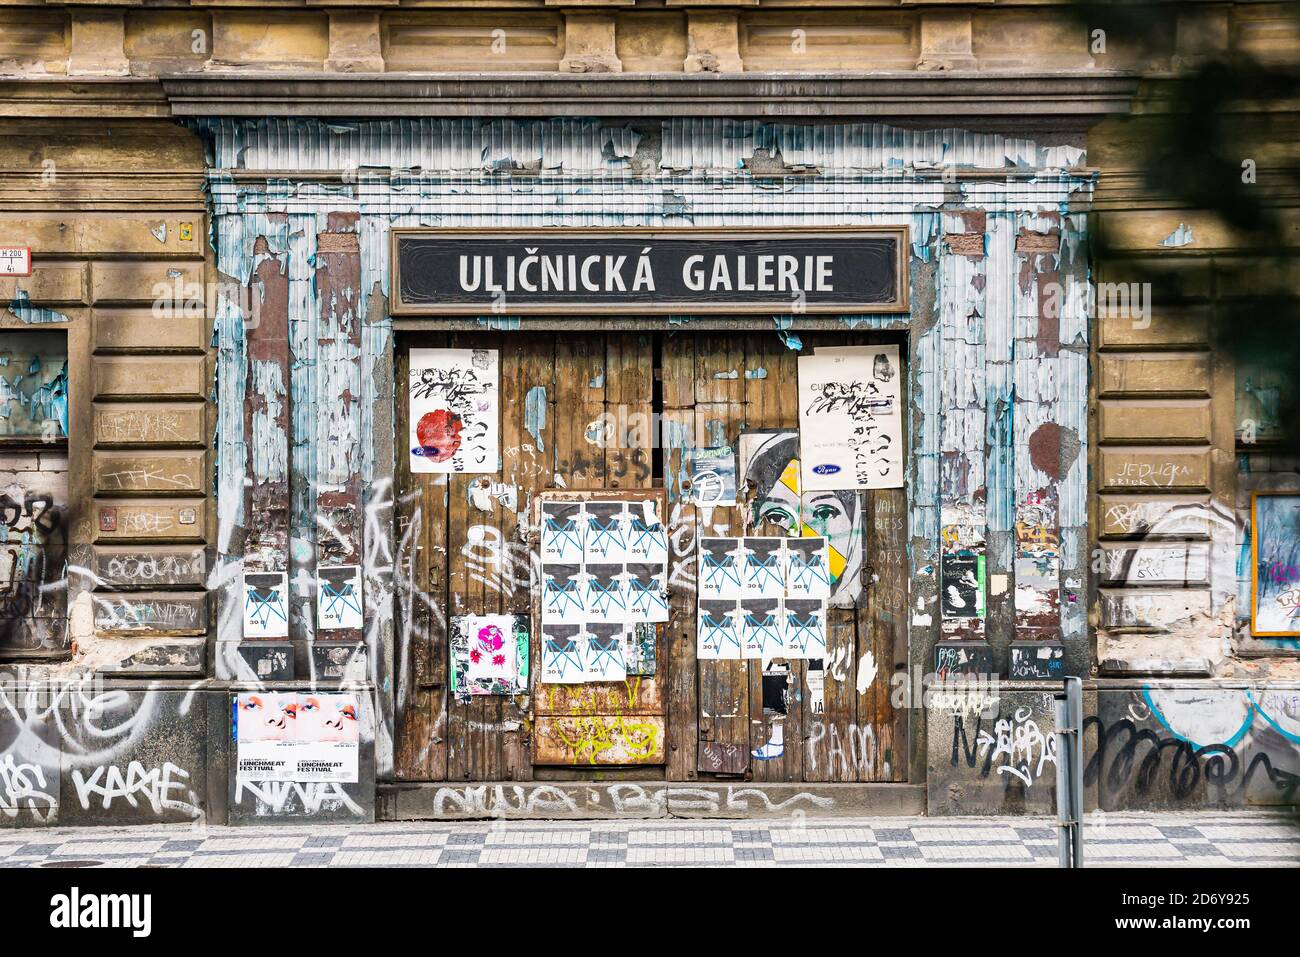 Prague, Czech republic - August 31, 2019. Door with old wallpapers with the main board Ulicnicka galerie in Holesovice Stock Photo